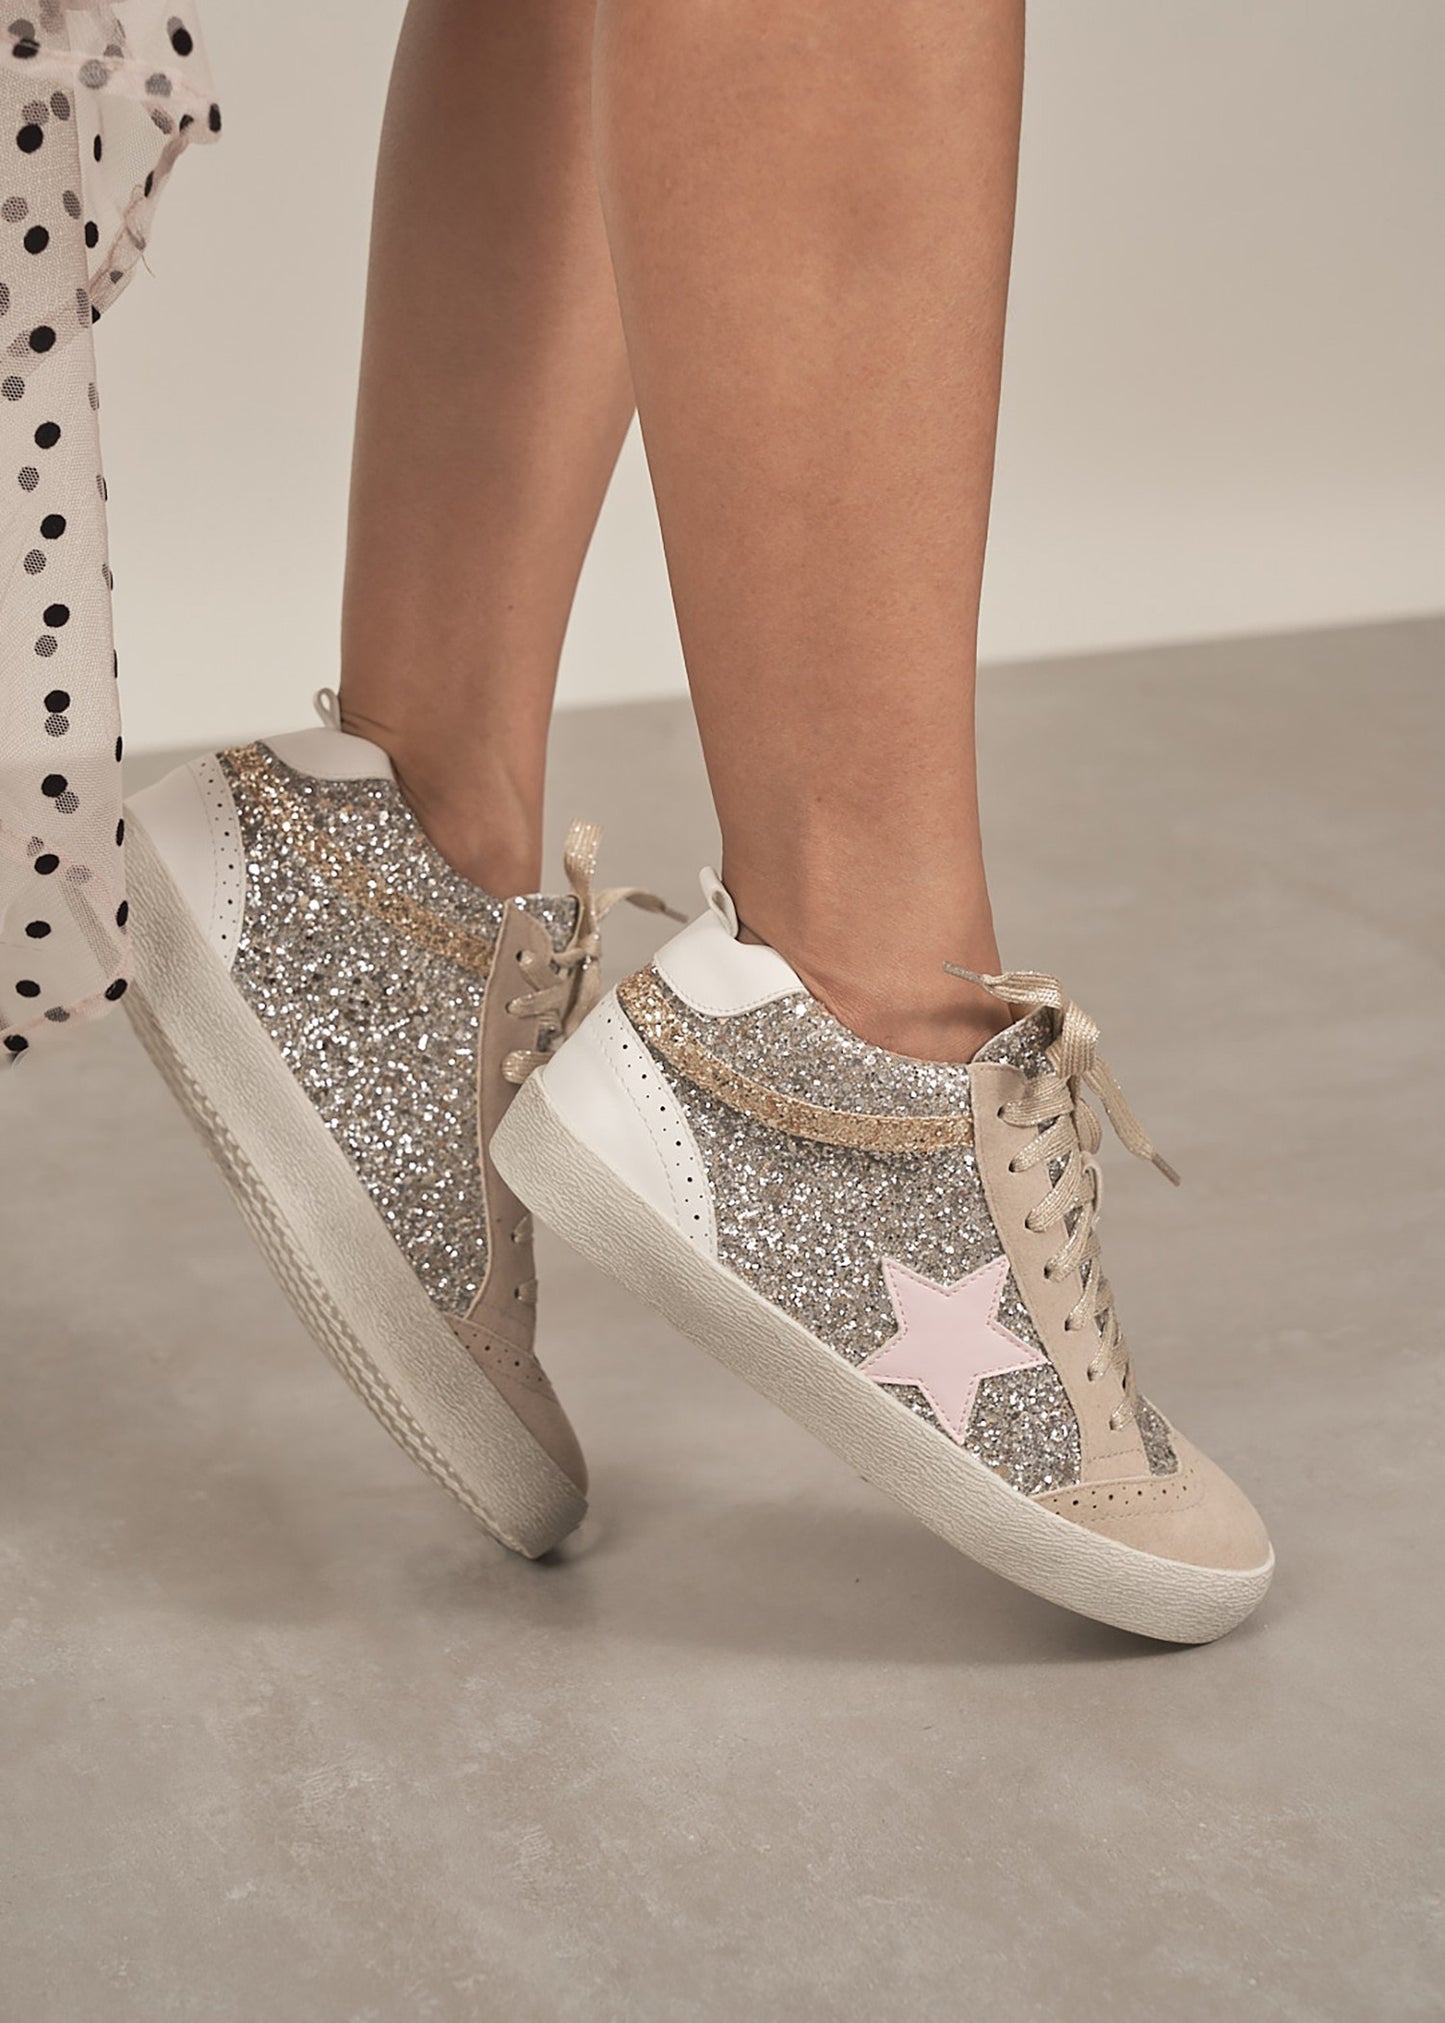 The Lacey Star Ankle Shoes